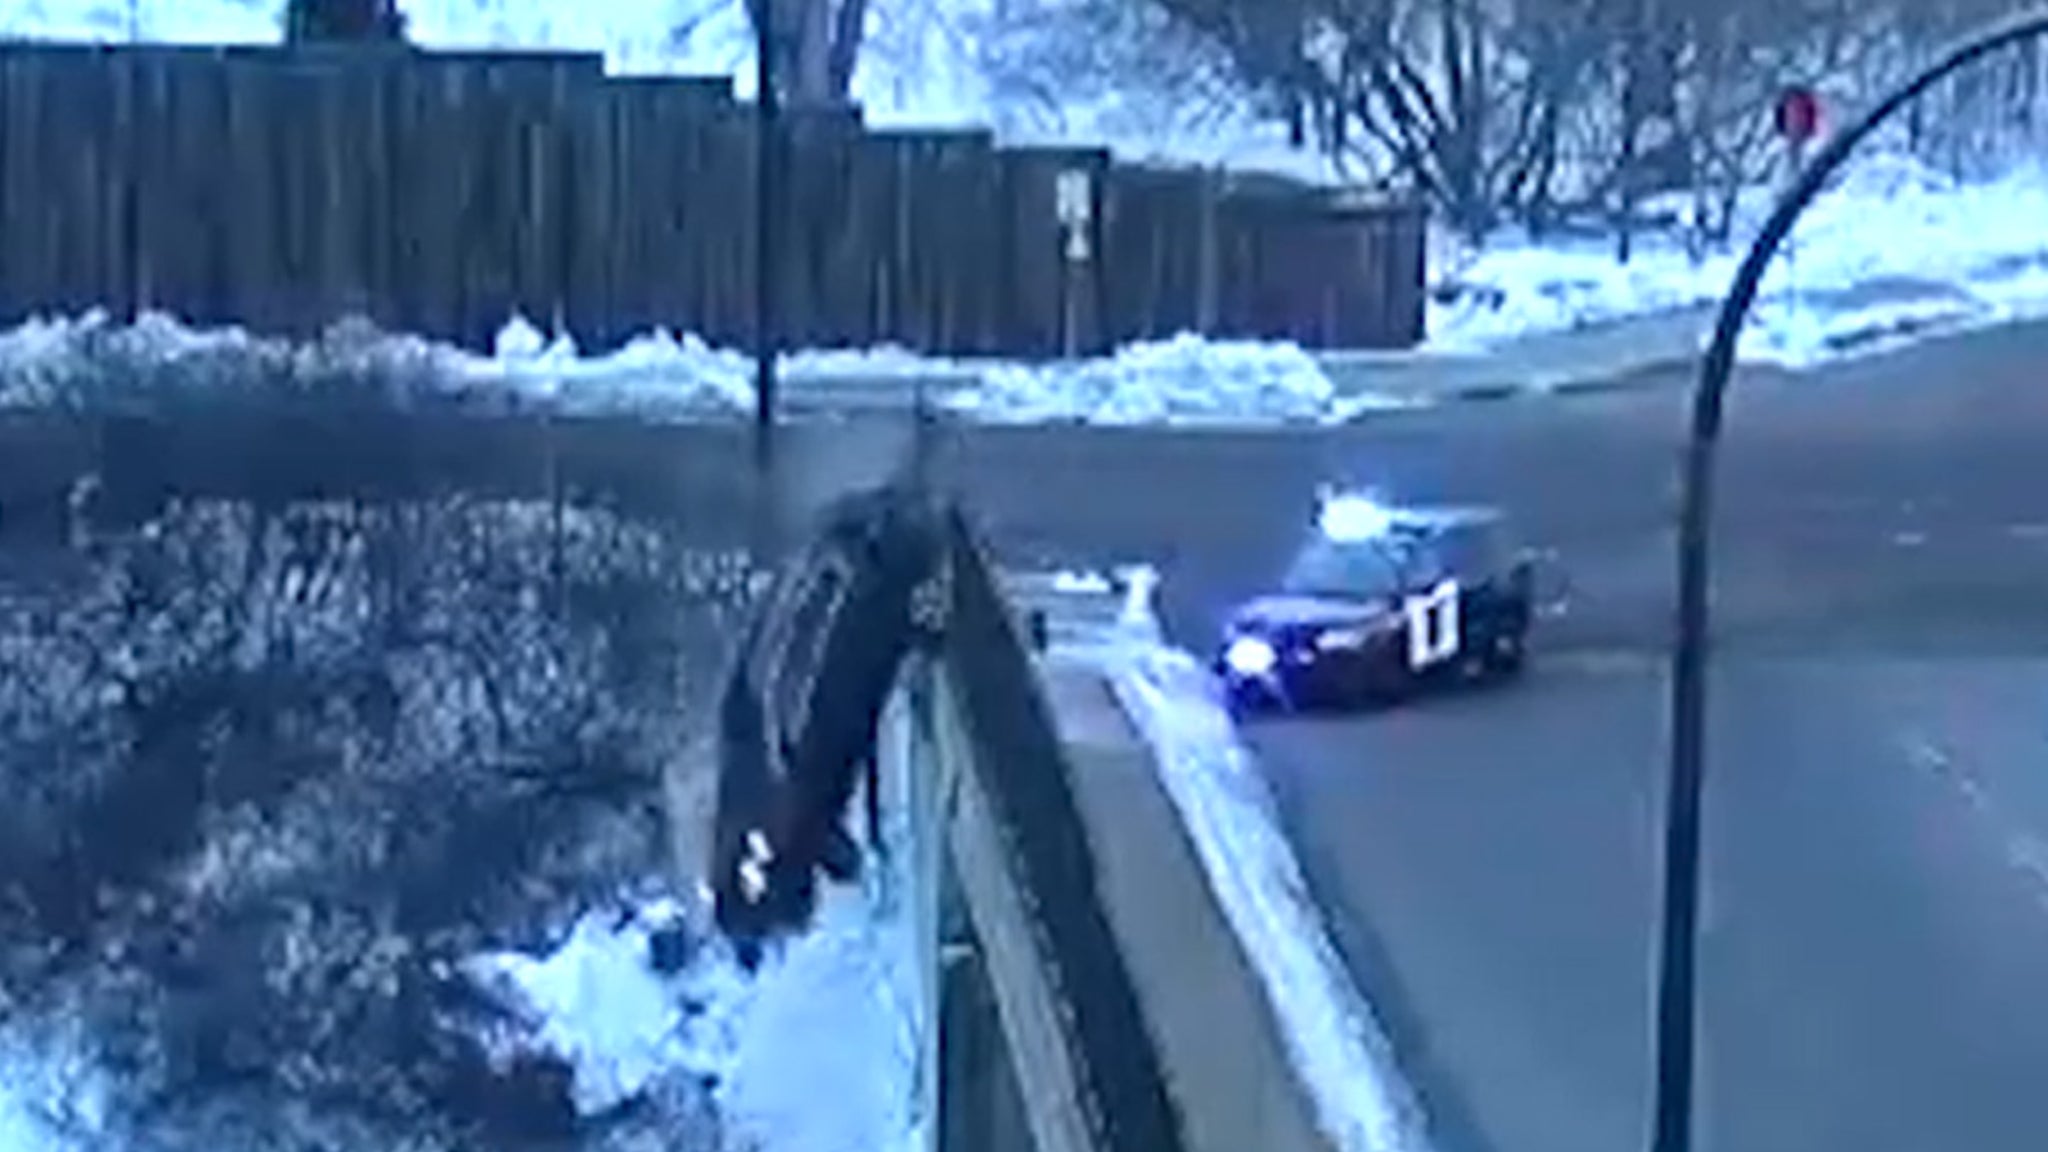 Dramatic New Video Shows Wild Police Car Chase and Crash